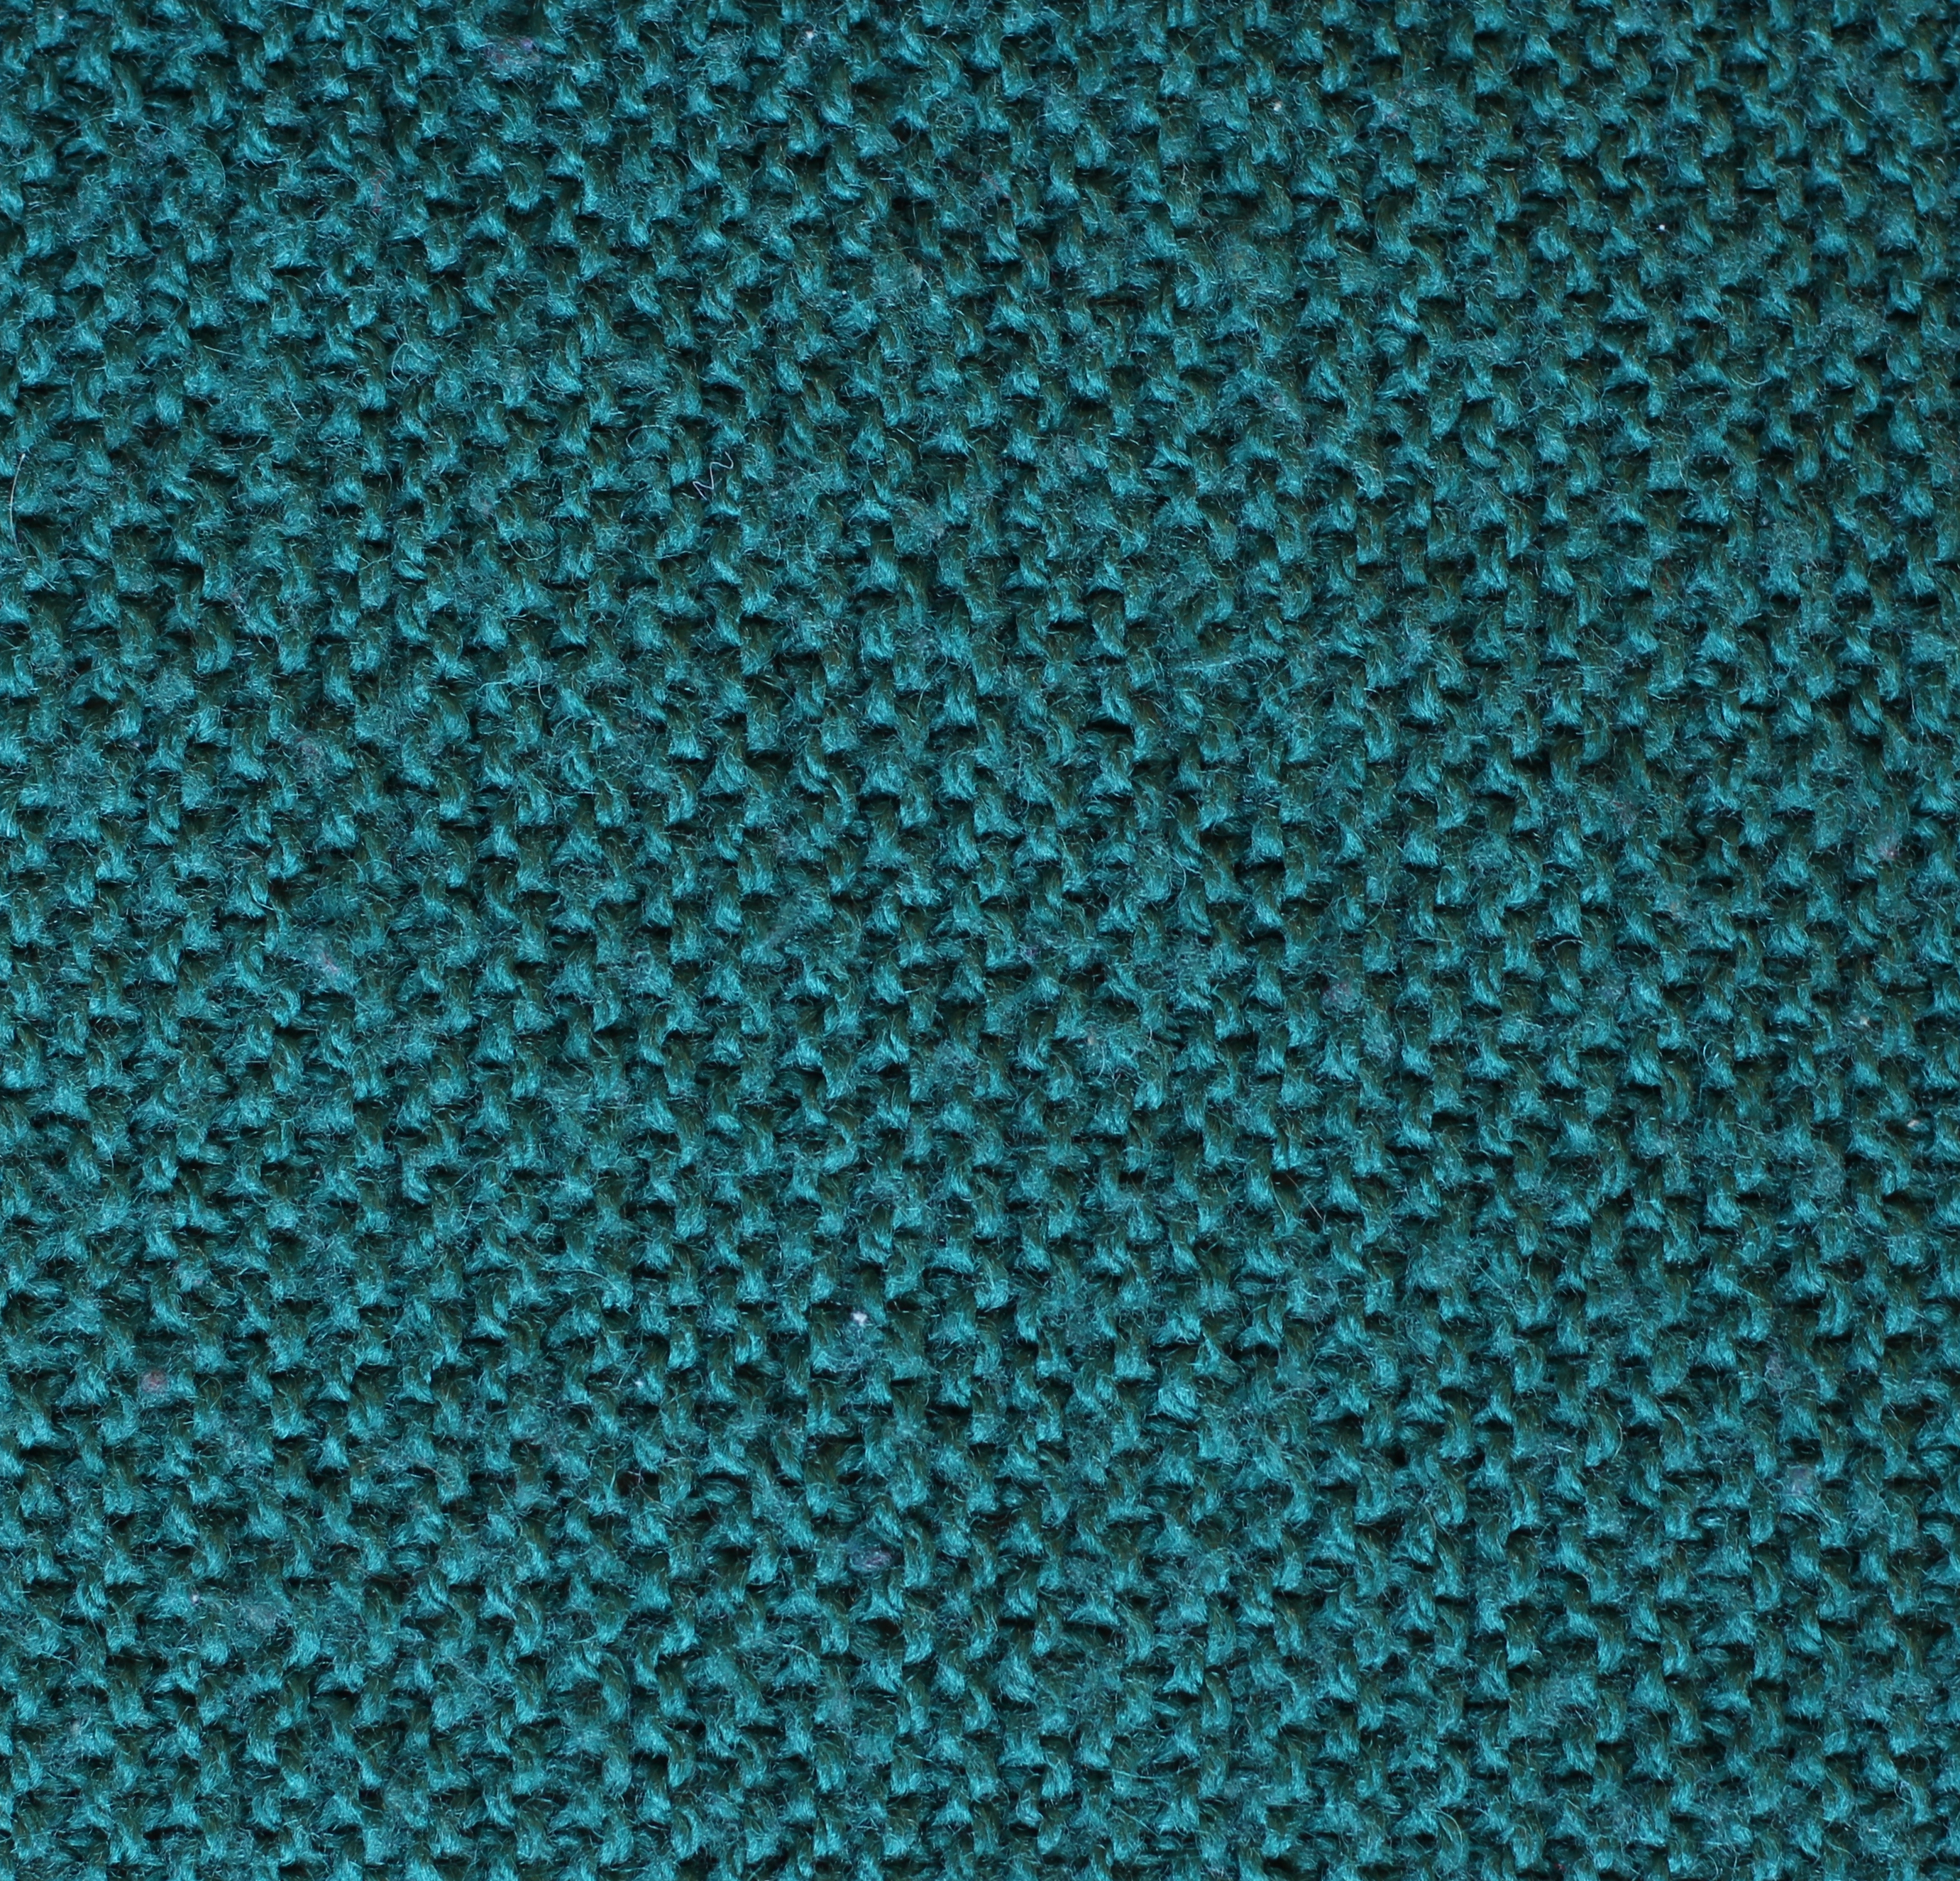 Knitted wool texture background image